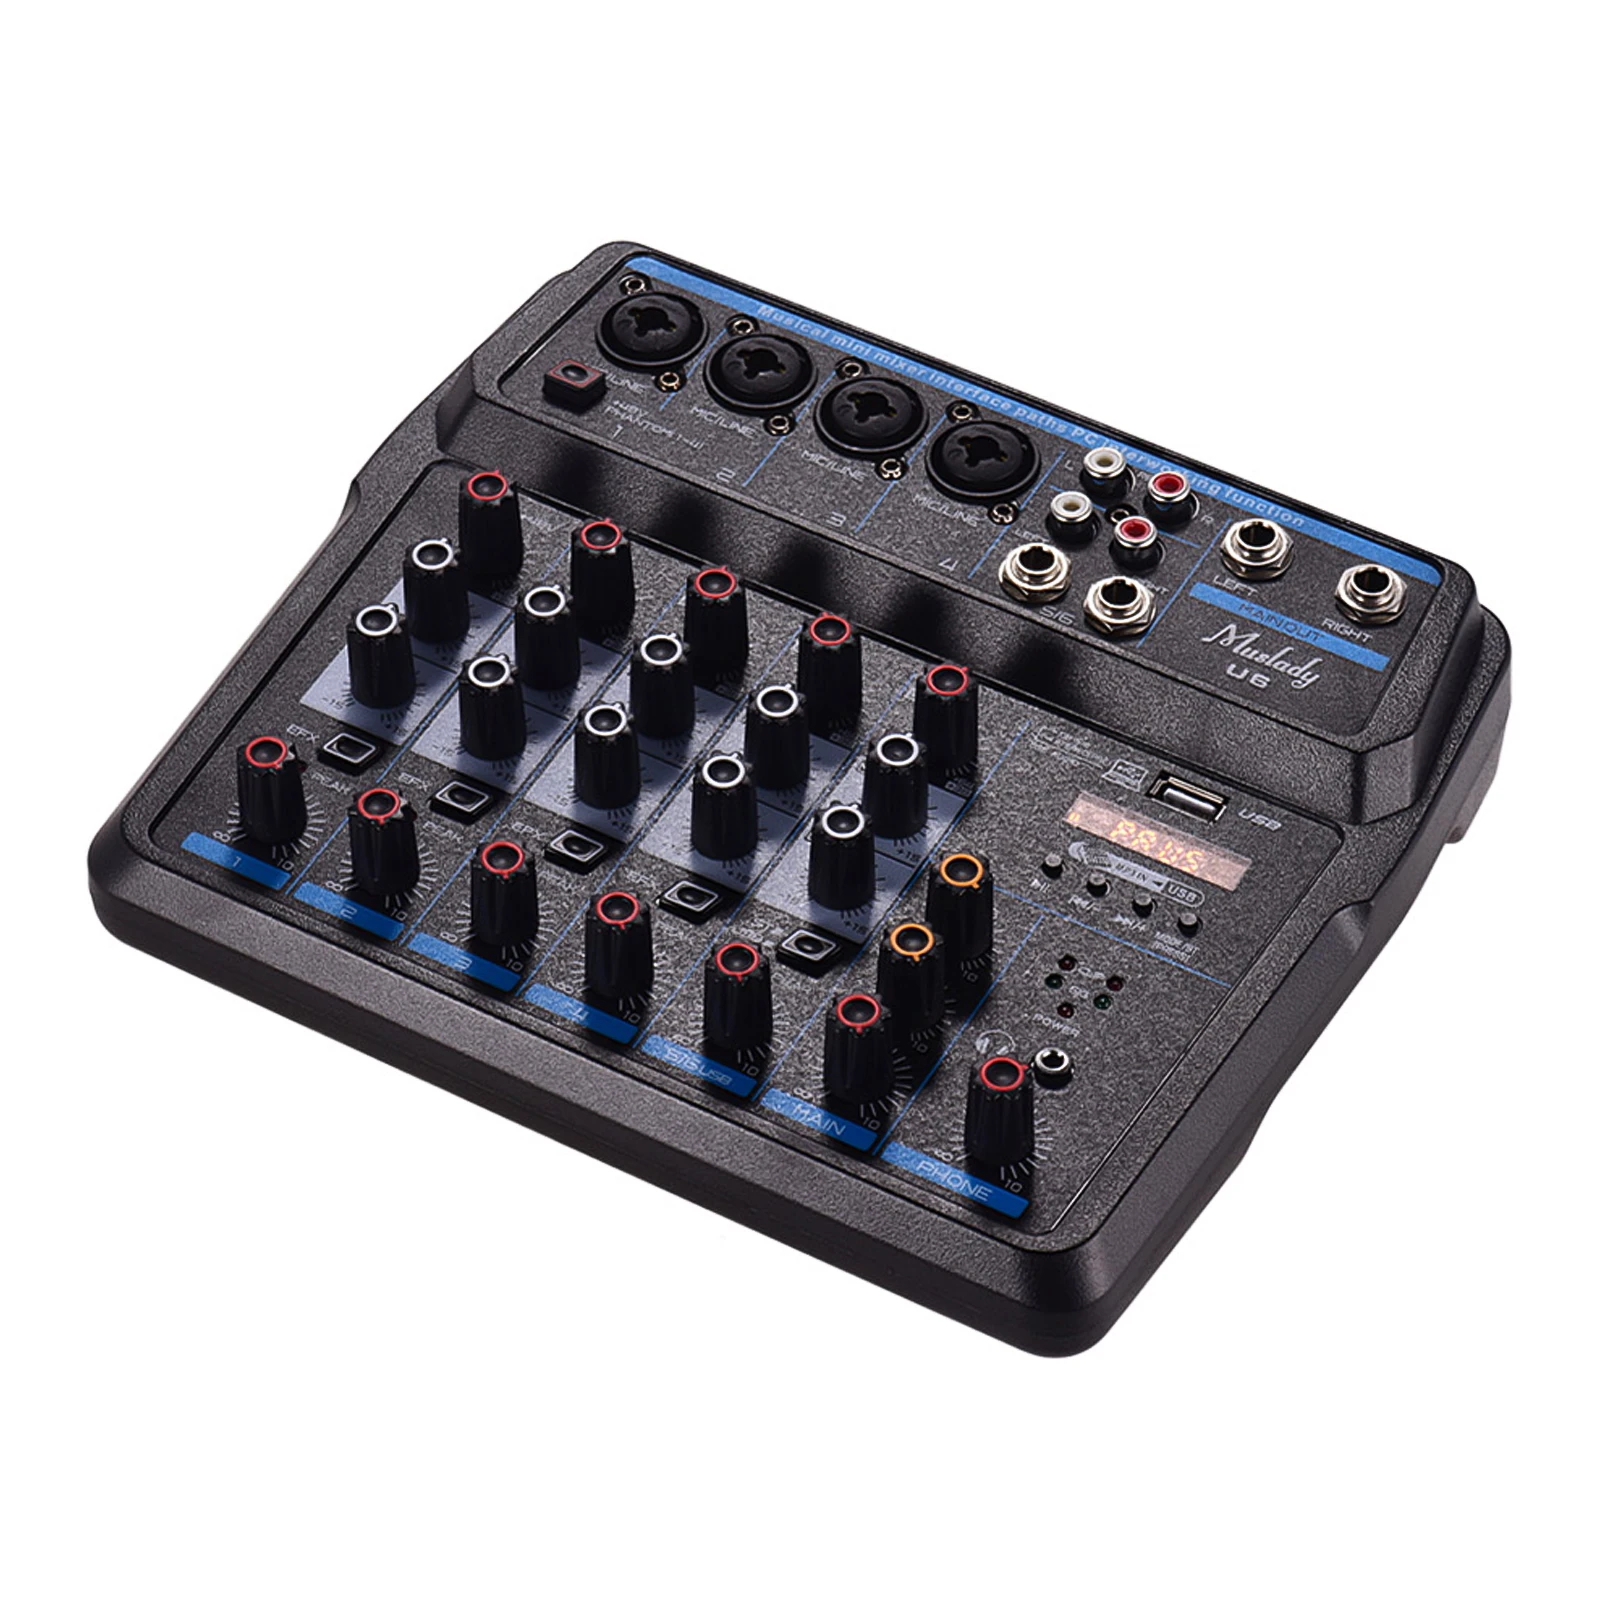 Acquiesce krone falanks U6 Musical Mini Mixer 6 Channels Audio Mixers Bt Usb Mixing Console With  Sound Card Built-in 48v Phantom Power Eu Plug - Electric Instrument Parts &  Accessories - AliExpress